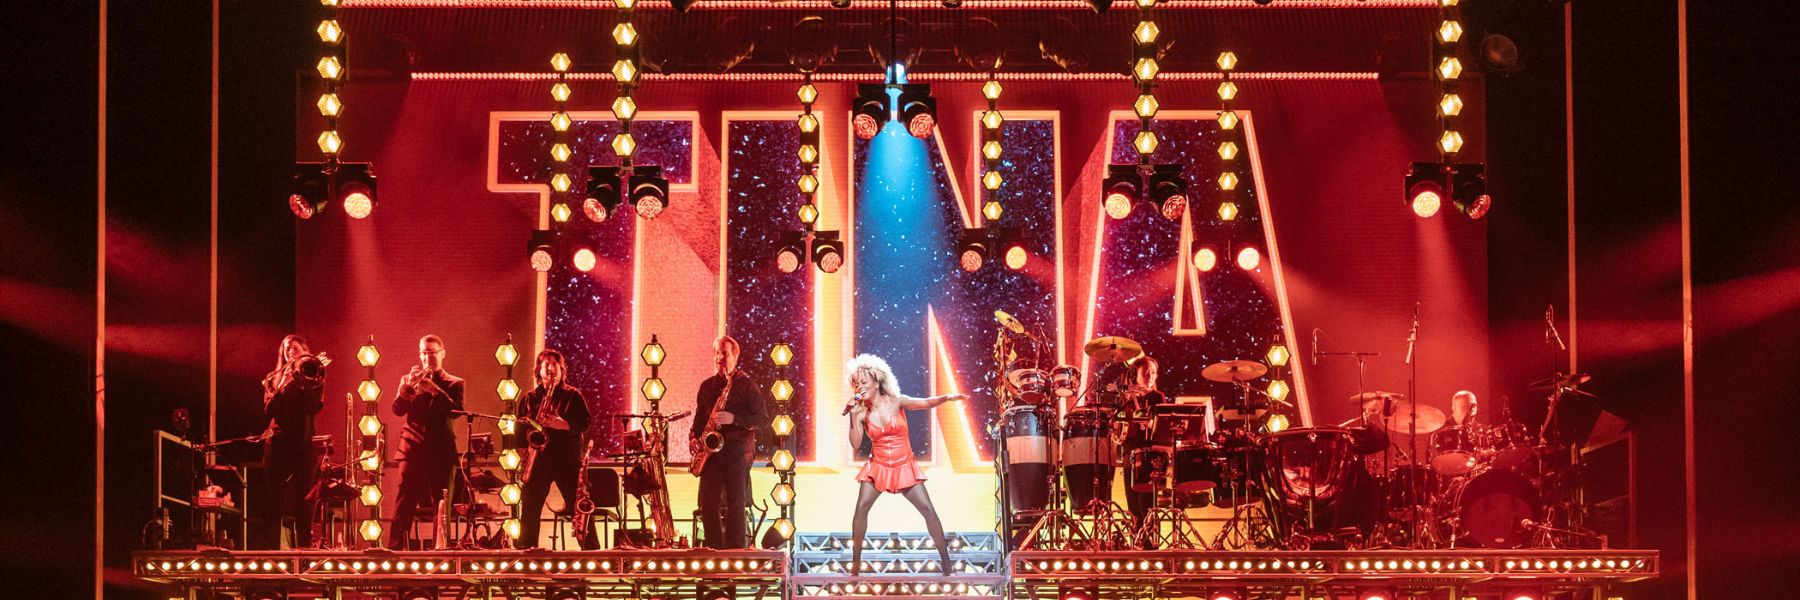 Tina – The Tina Turner Musical is at the top of our list of 15 things to do in St. Louis this November.